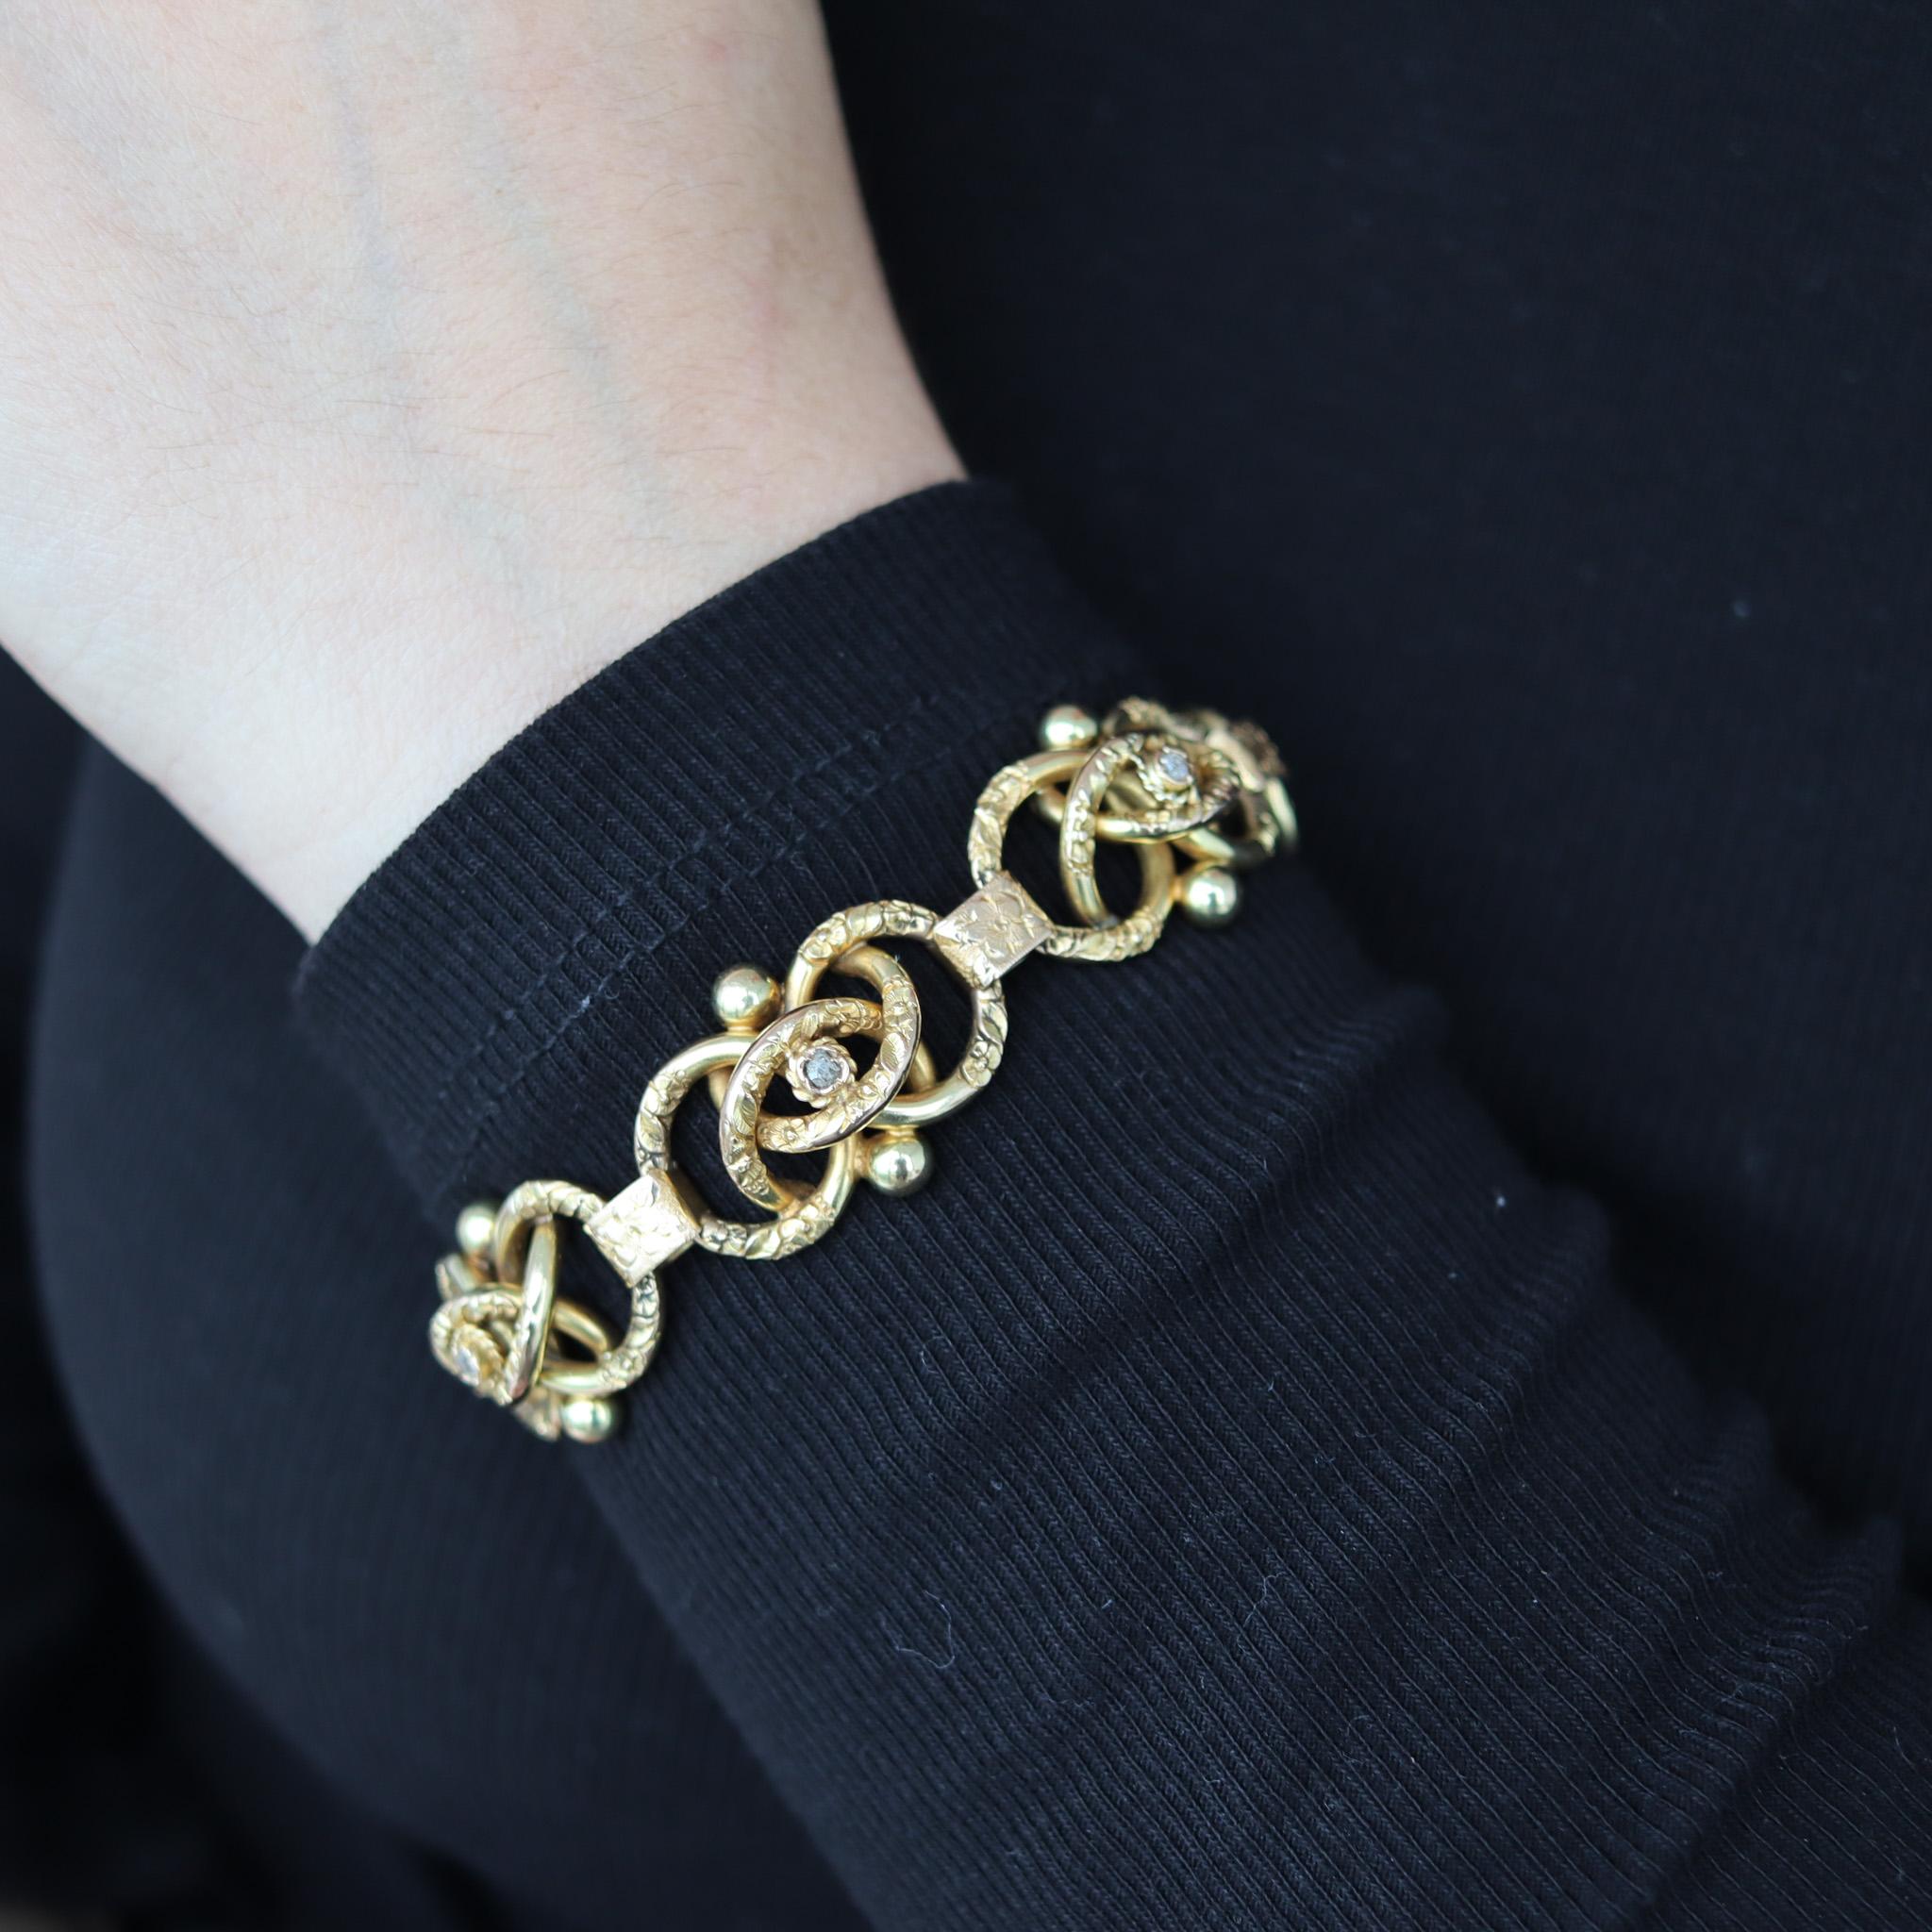 An Austro-Hungarian empire gold bracelet.

Very interesting antique bracelet, created during the Austro-Hungarian empire, back in the 1880. It was crafted in the city of Budapest, Hungary in rich yellow gold of 18 karats. The design is composed by